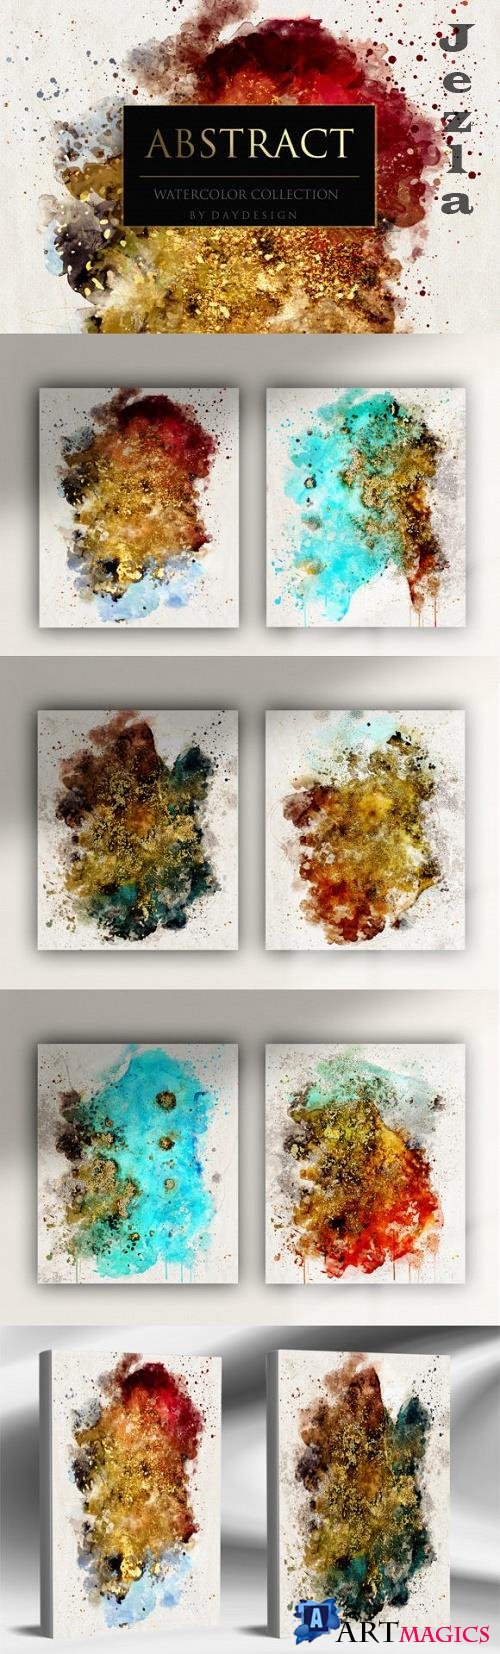 Abstract Watercolor Collection